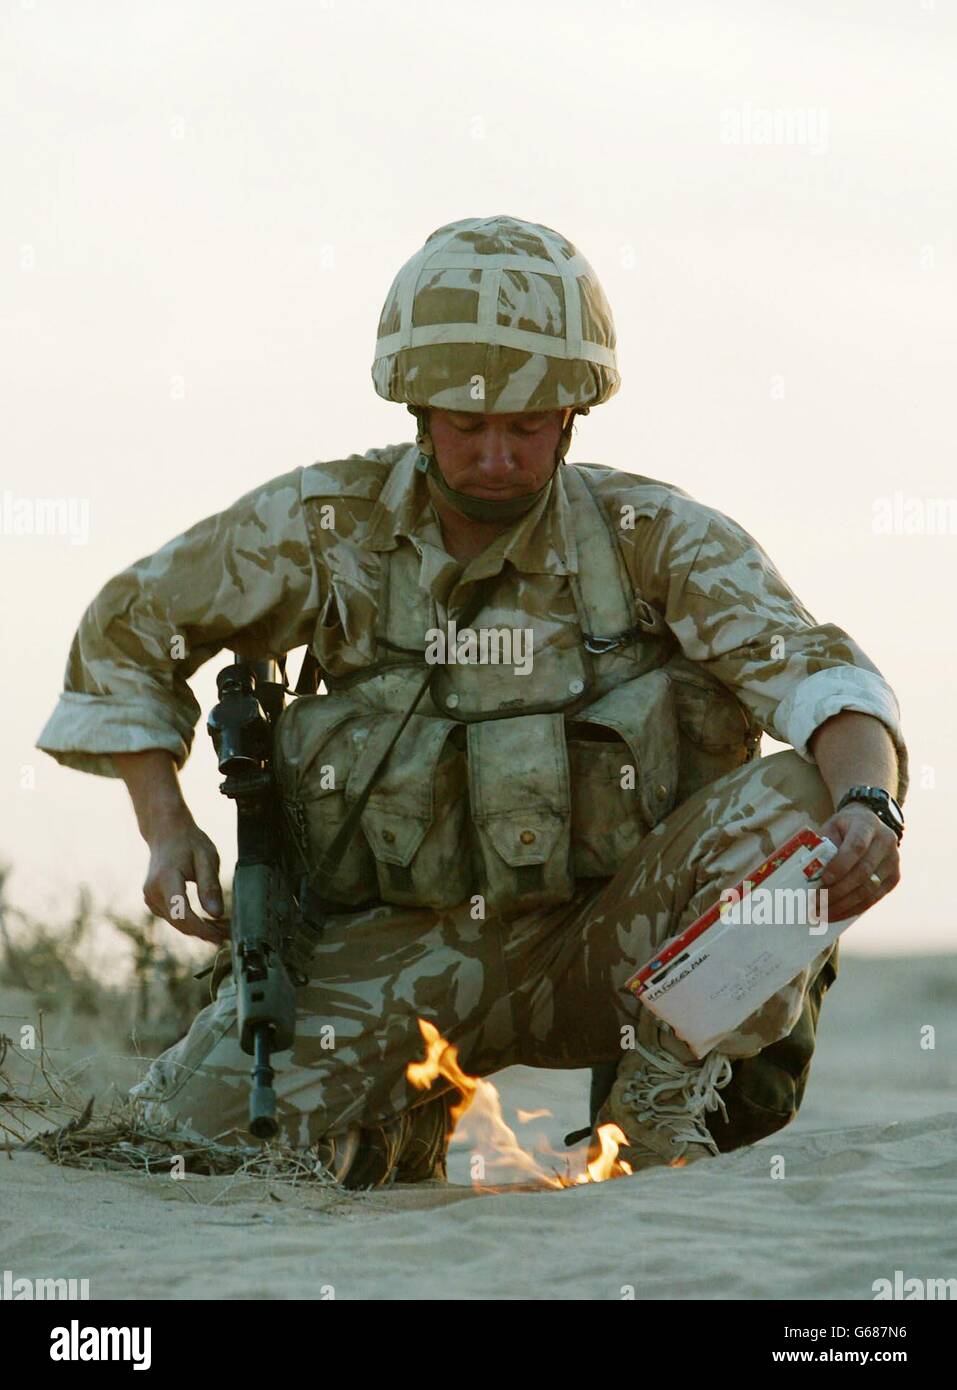 A soldier from the British 29 Commando Regiment Royal Artillery 'sanitises' his kit by burning his personal mail in the Kuwait desert near the Iraqi border. *..Troops potentially involved in future operations sanitise their kit so as not to include any effects that may be of assistance to the enemy. As Military forces in the Gulf gear up for war, U.S. President Bush will meet the British and Spanish Prime Ministers on Sunday amid diplomatic deadlock at the United Nations over U.S.-led plans to disarm Iraq. Stock Photo